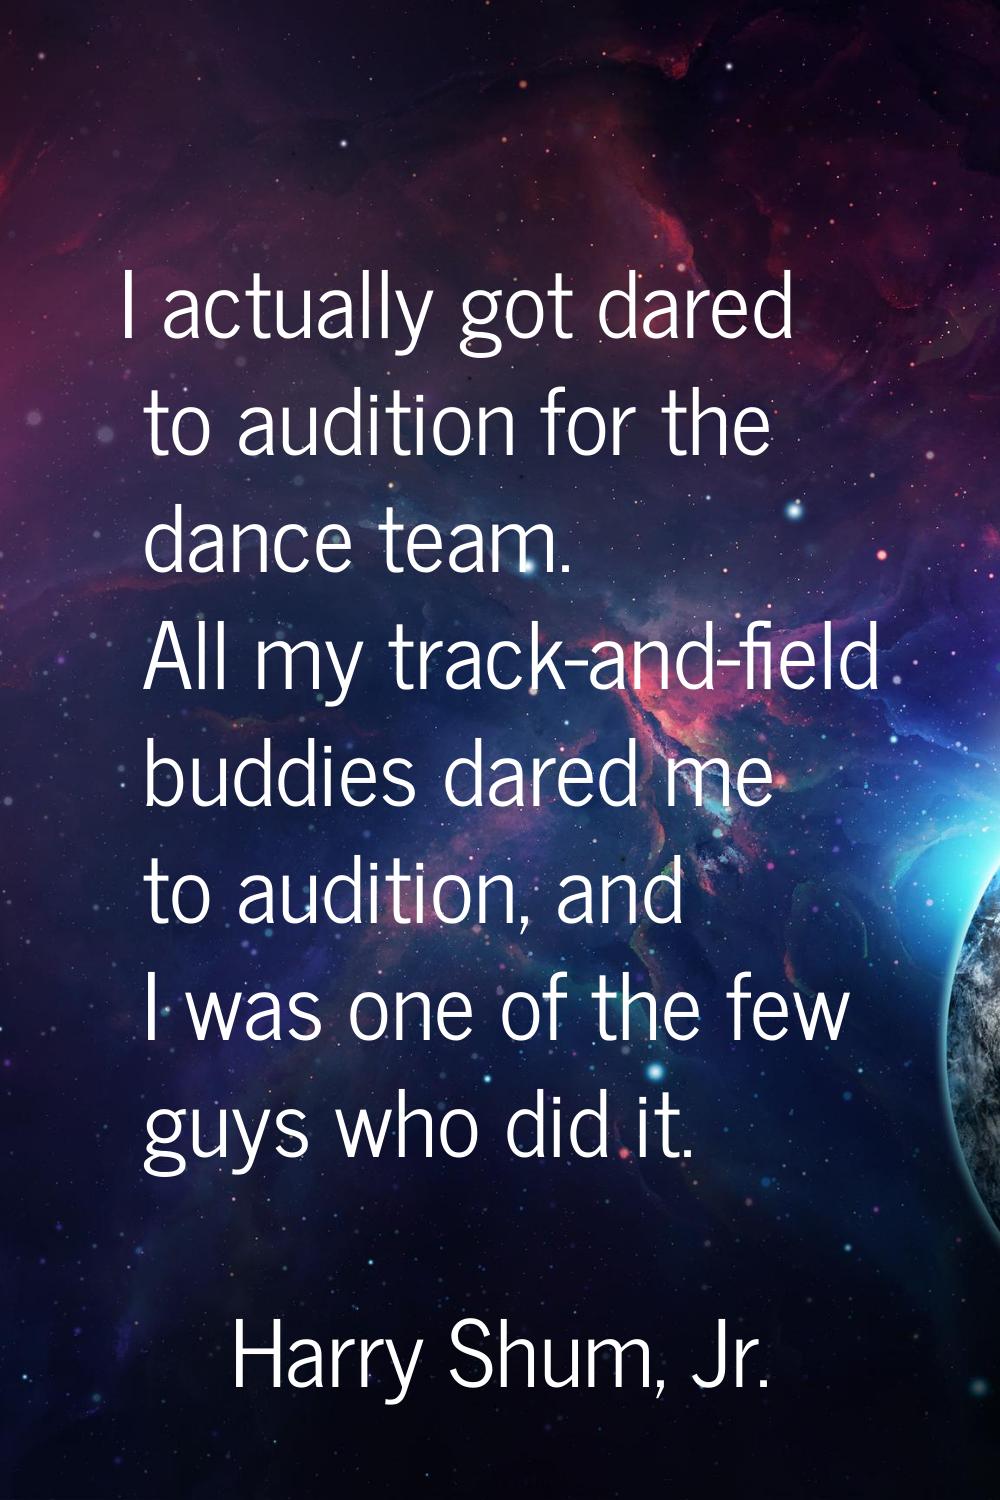 I actually got dared to audition for the dance team. All my track-and-field buddies dared me to aud